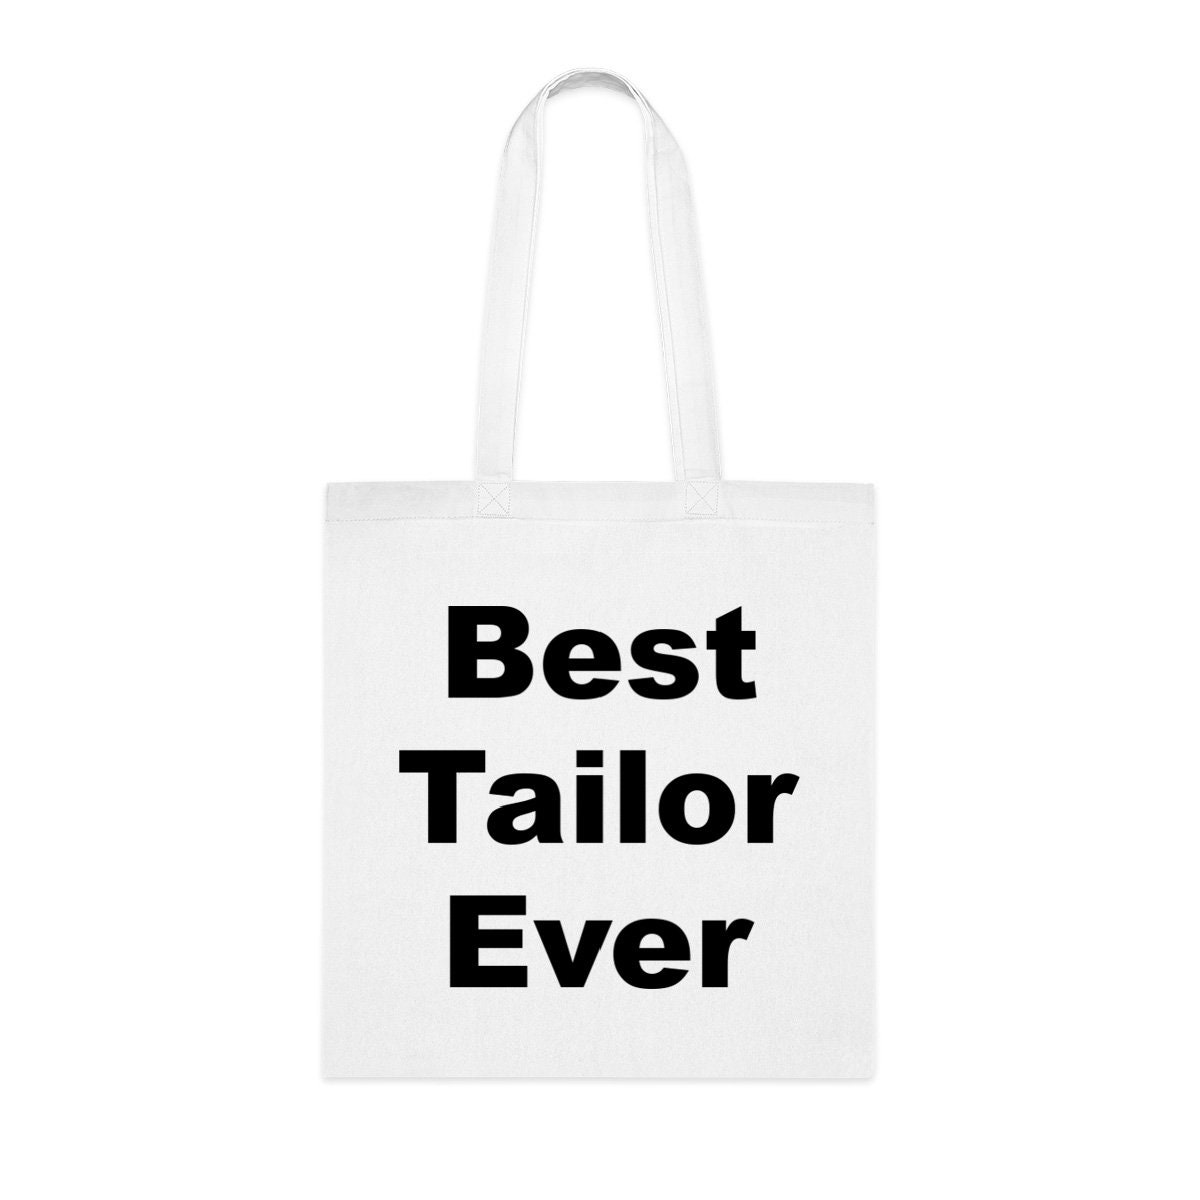 Tailor Bags & Backpacks | Unique Designs | Spreadshirt